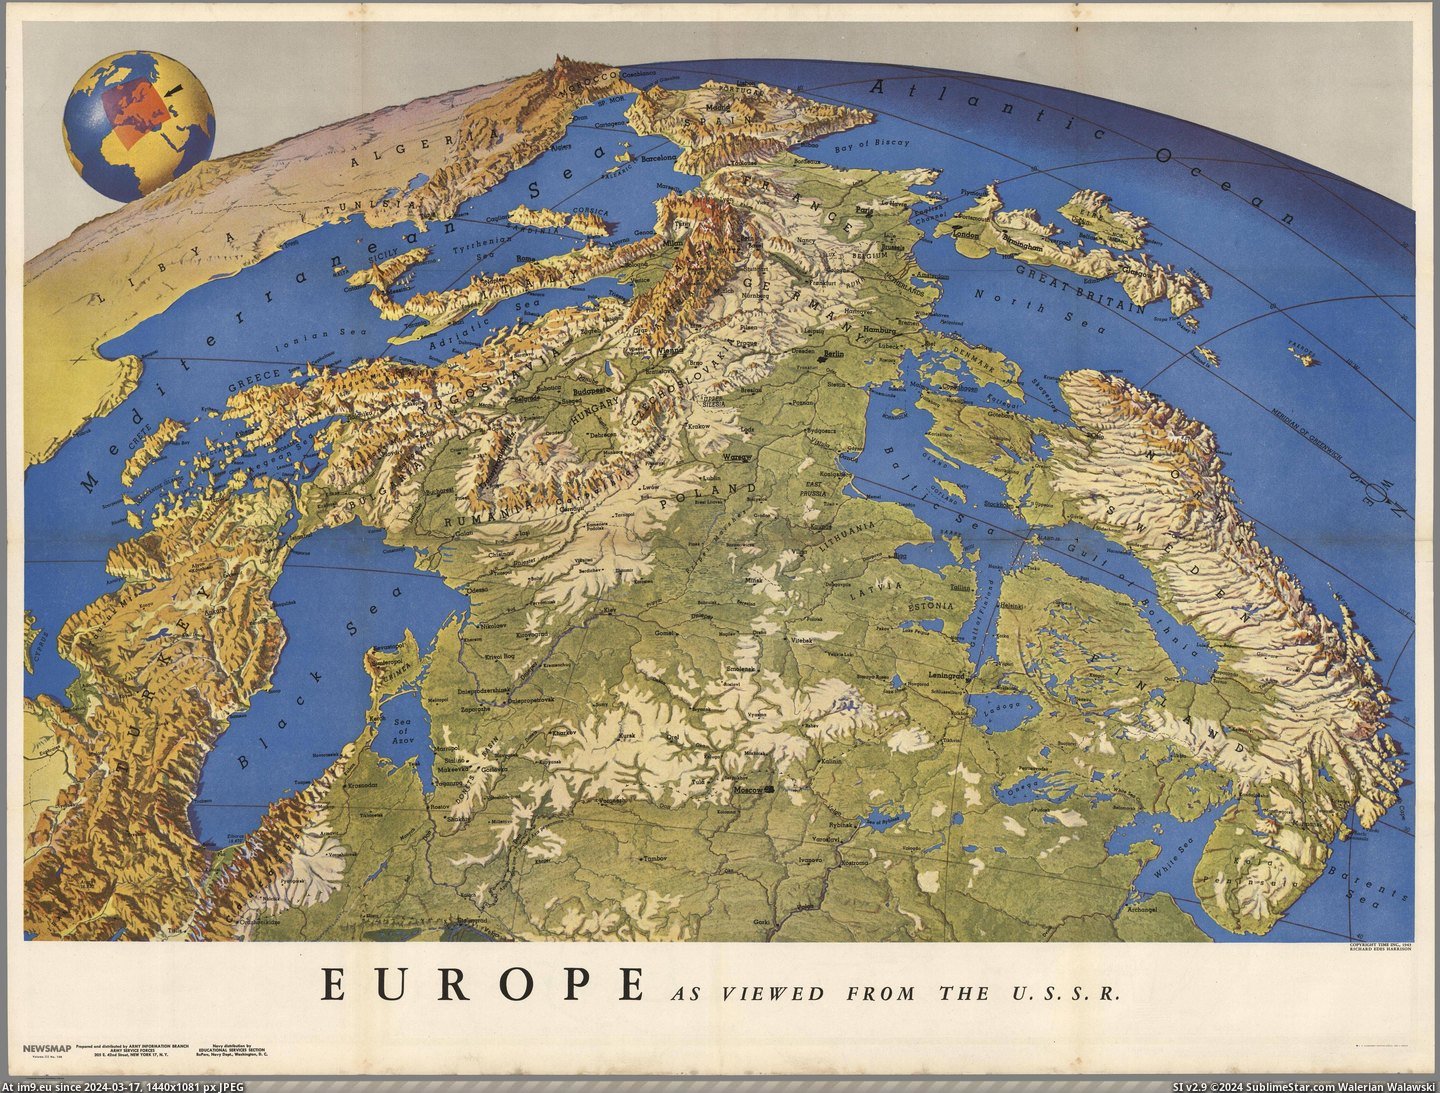 #Europe #Information #Harrison #Viewed #Ussr #Army #Branch [Mapporn] Europe as viewed from the USSR. Made by R. Harrison for the US Army Information Branch in 1944 [4794x3610] Pic. (Image of album My r/MAPS favs))